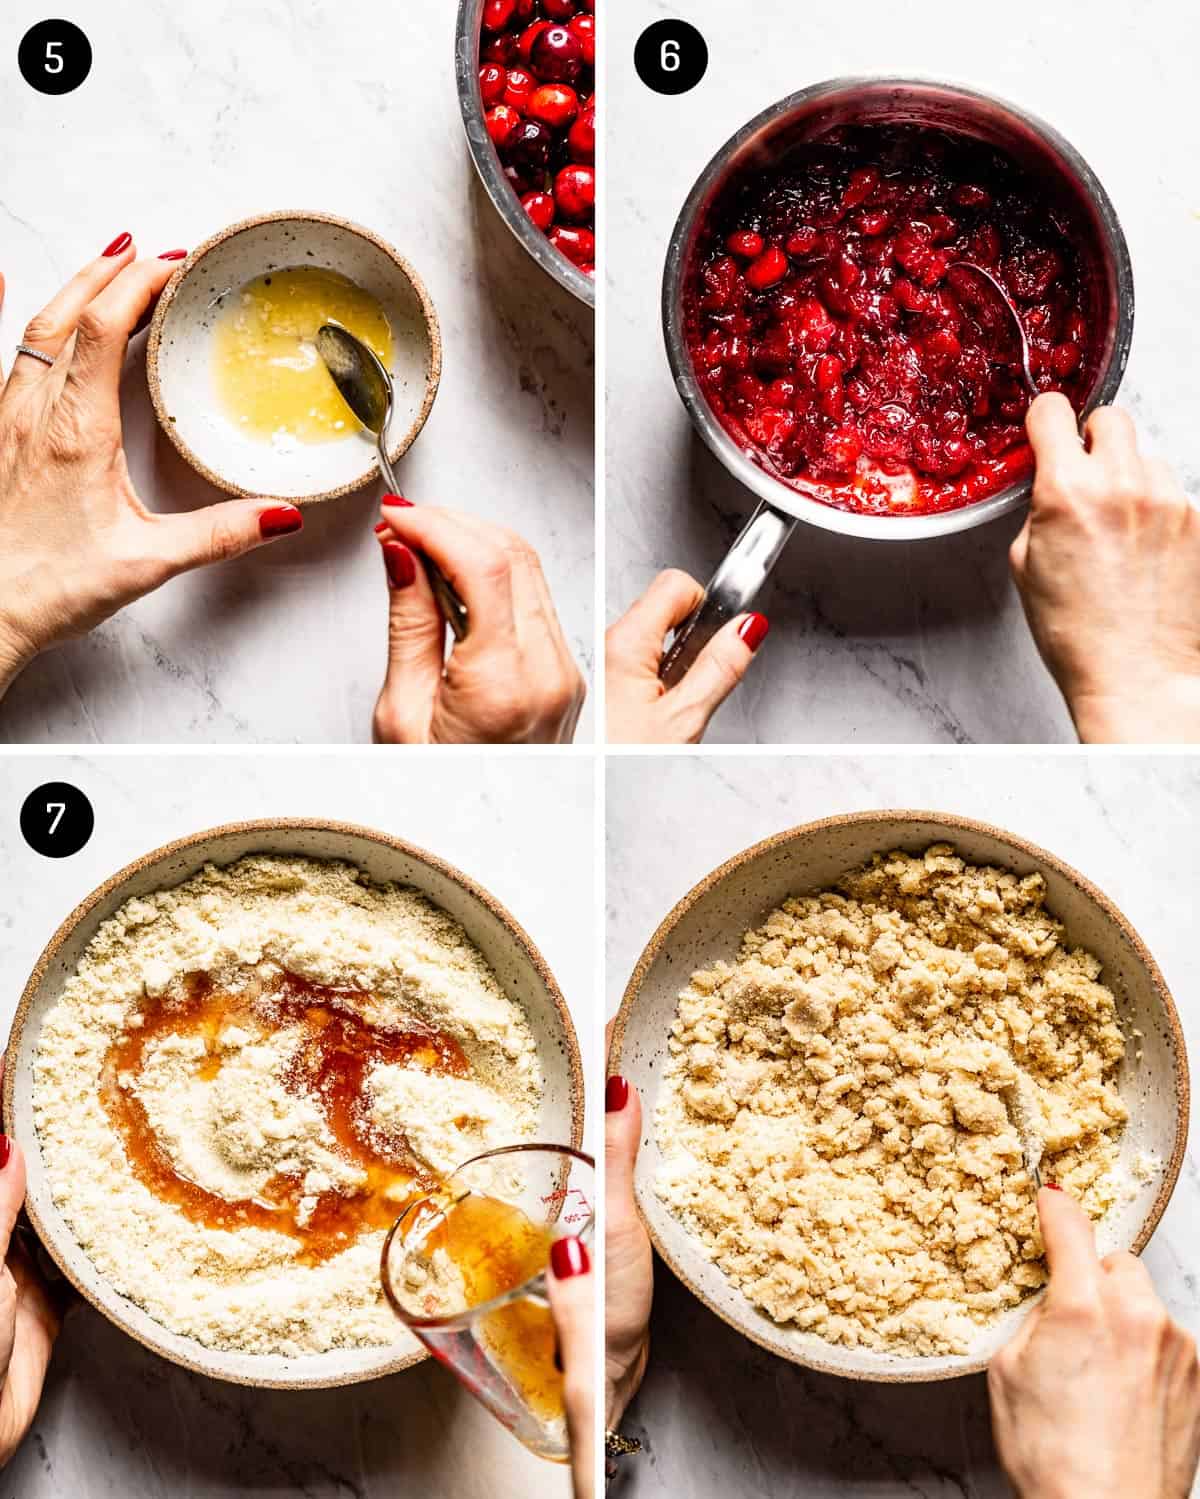 A collage of images showing how to make the cranberry filling and crumble